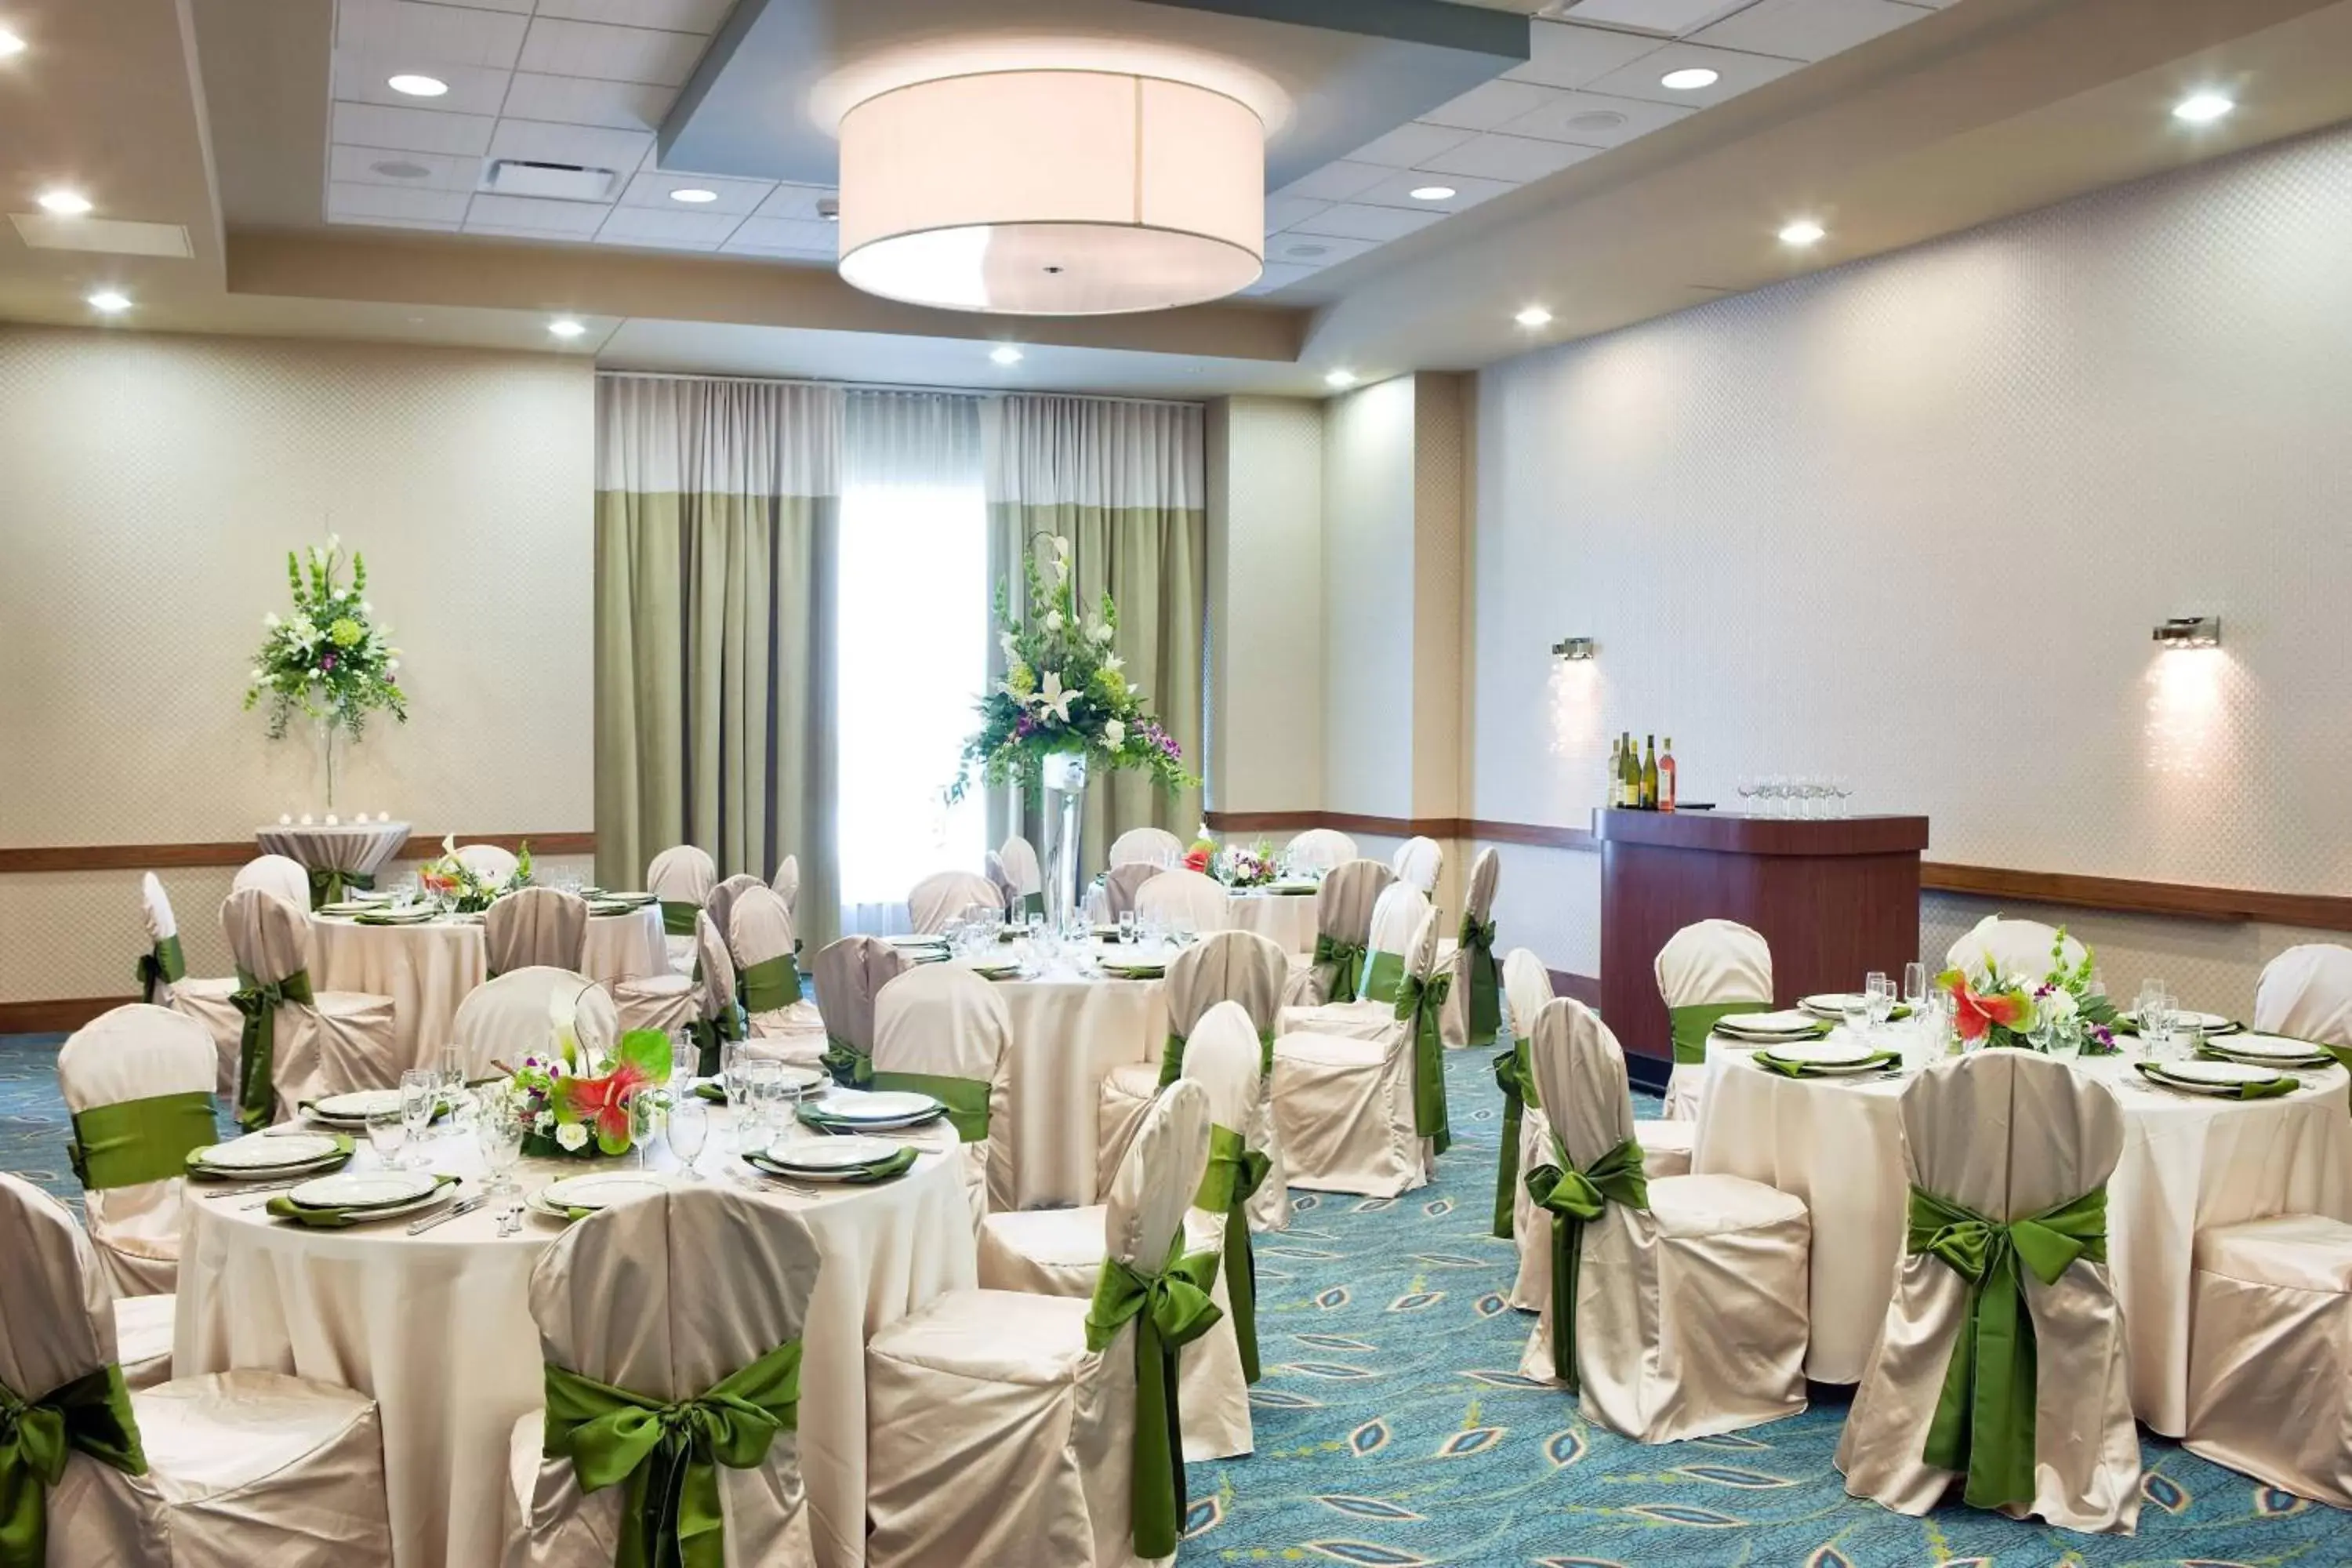 Banquet/Function facilities, Banquet Facilities in SpringHill Suites by Marriott Las Vegas Convention Center